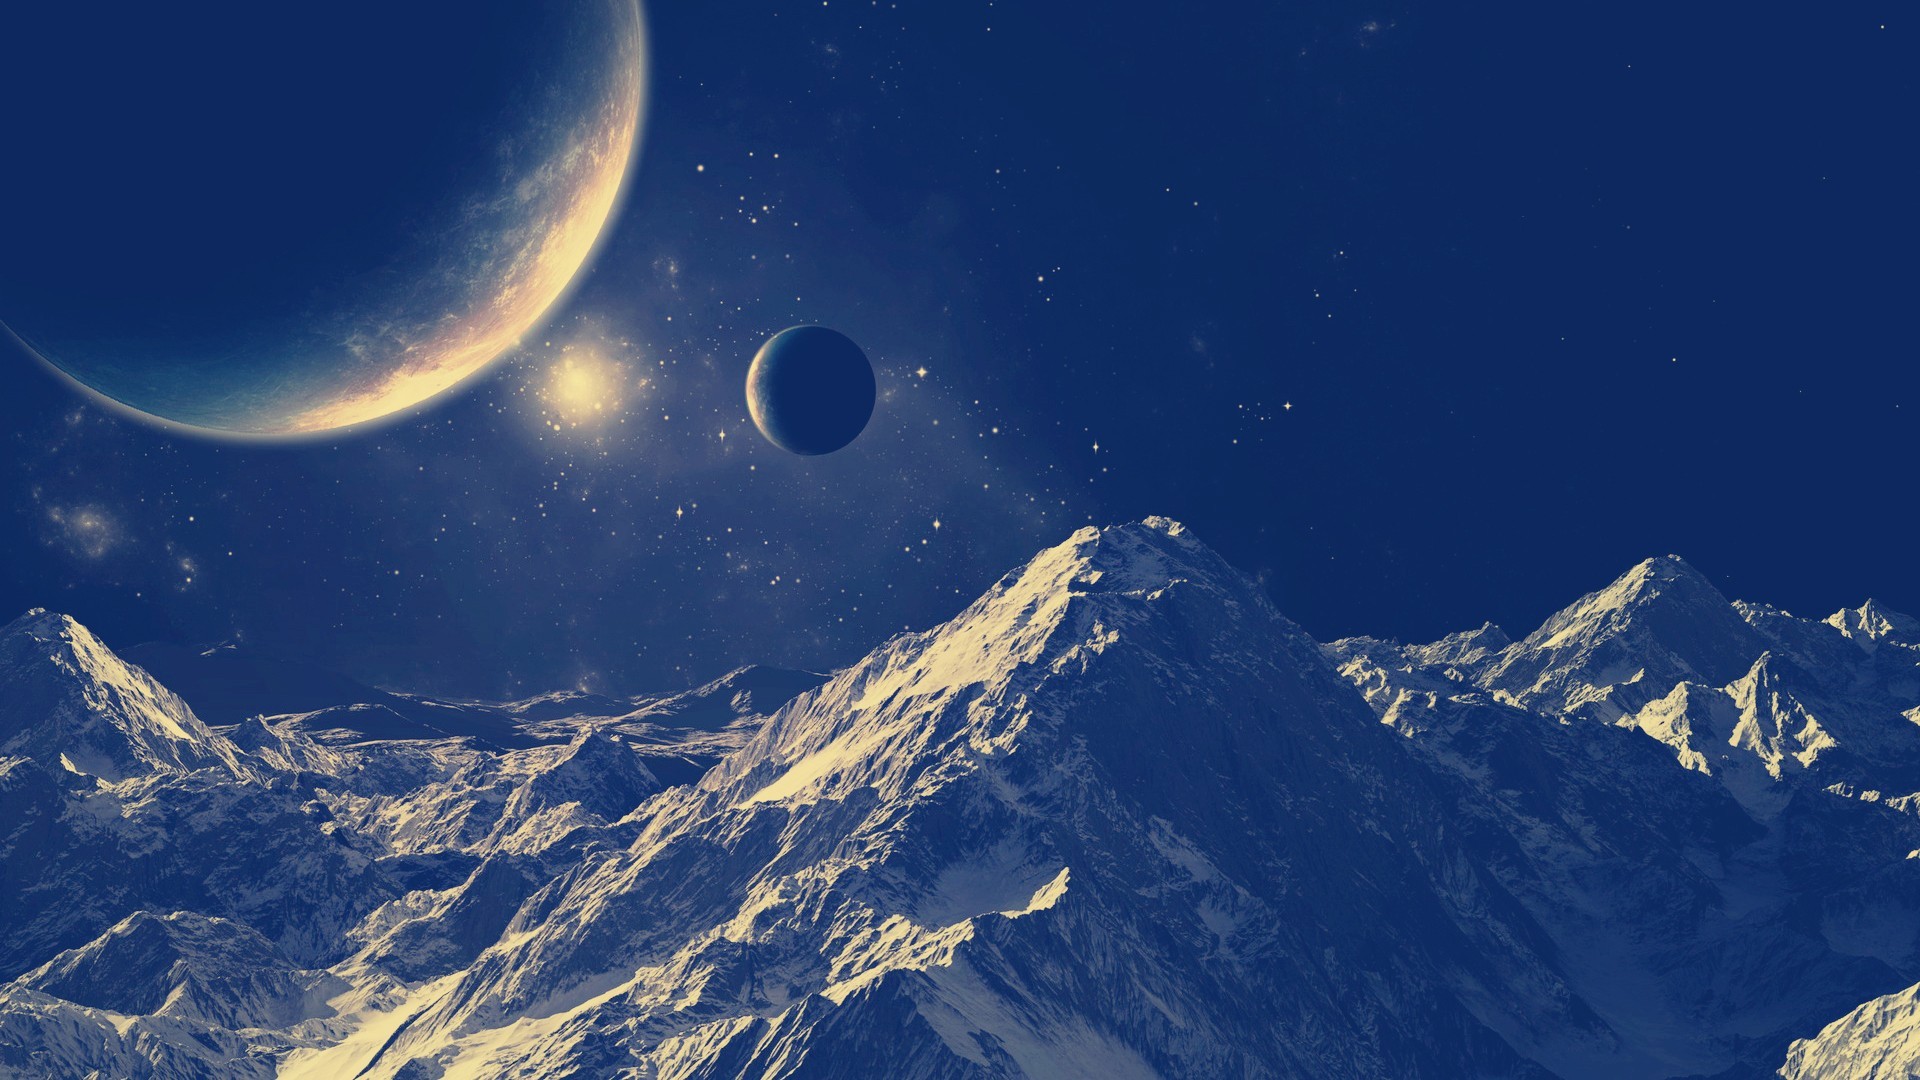 General 1920x1080 space space art nature mountains digital art planet stars